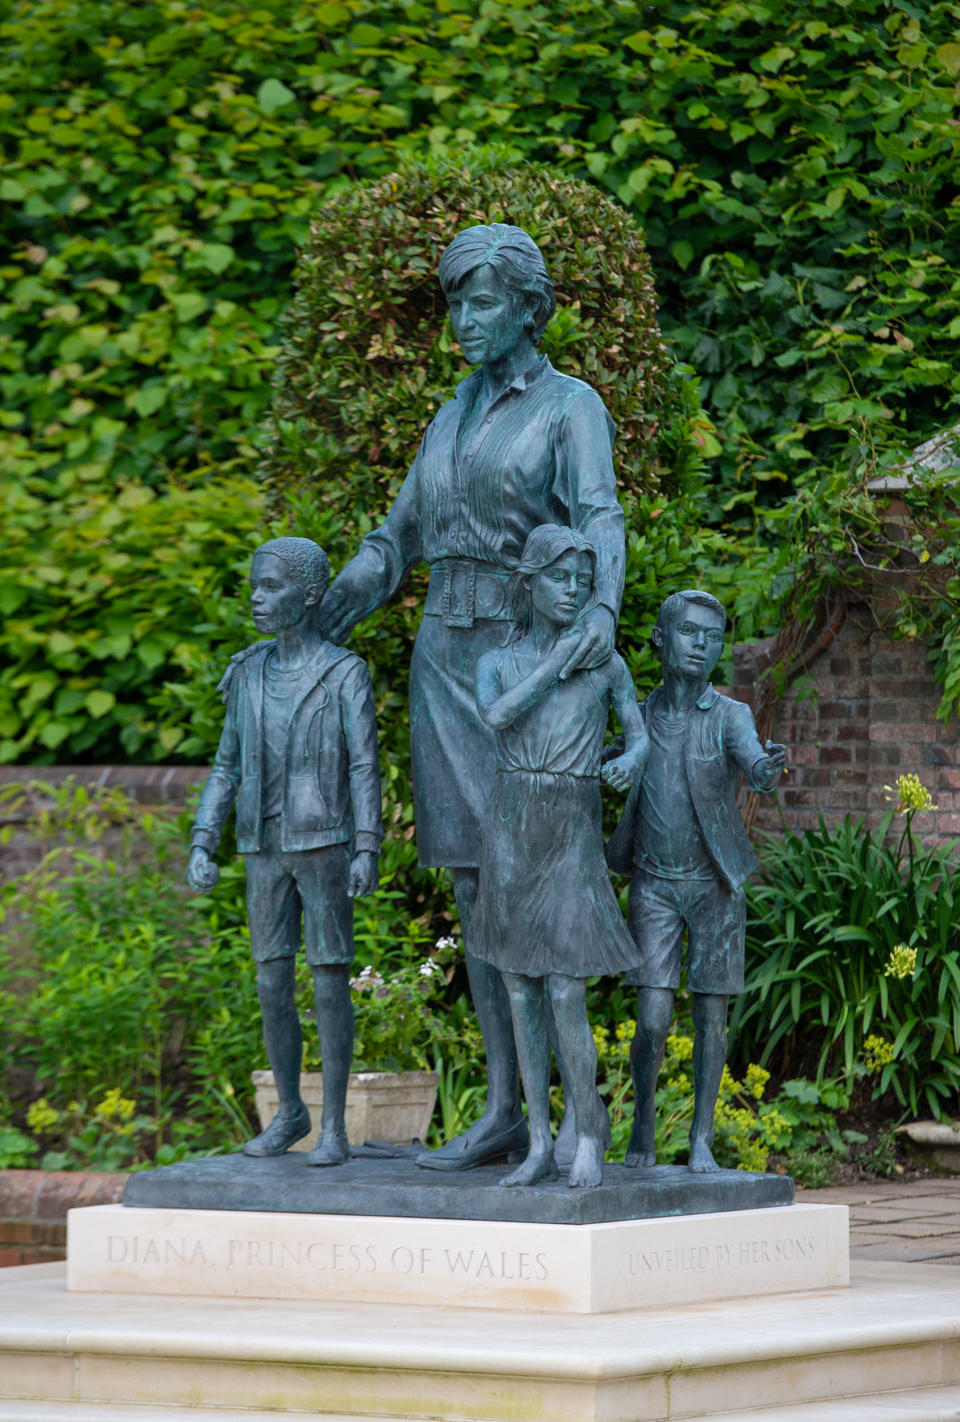 Diana, Princess Of Wales Statue Unveiling At Kensington Palace (Dominic Lipinski / Getty Images)